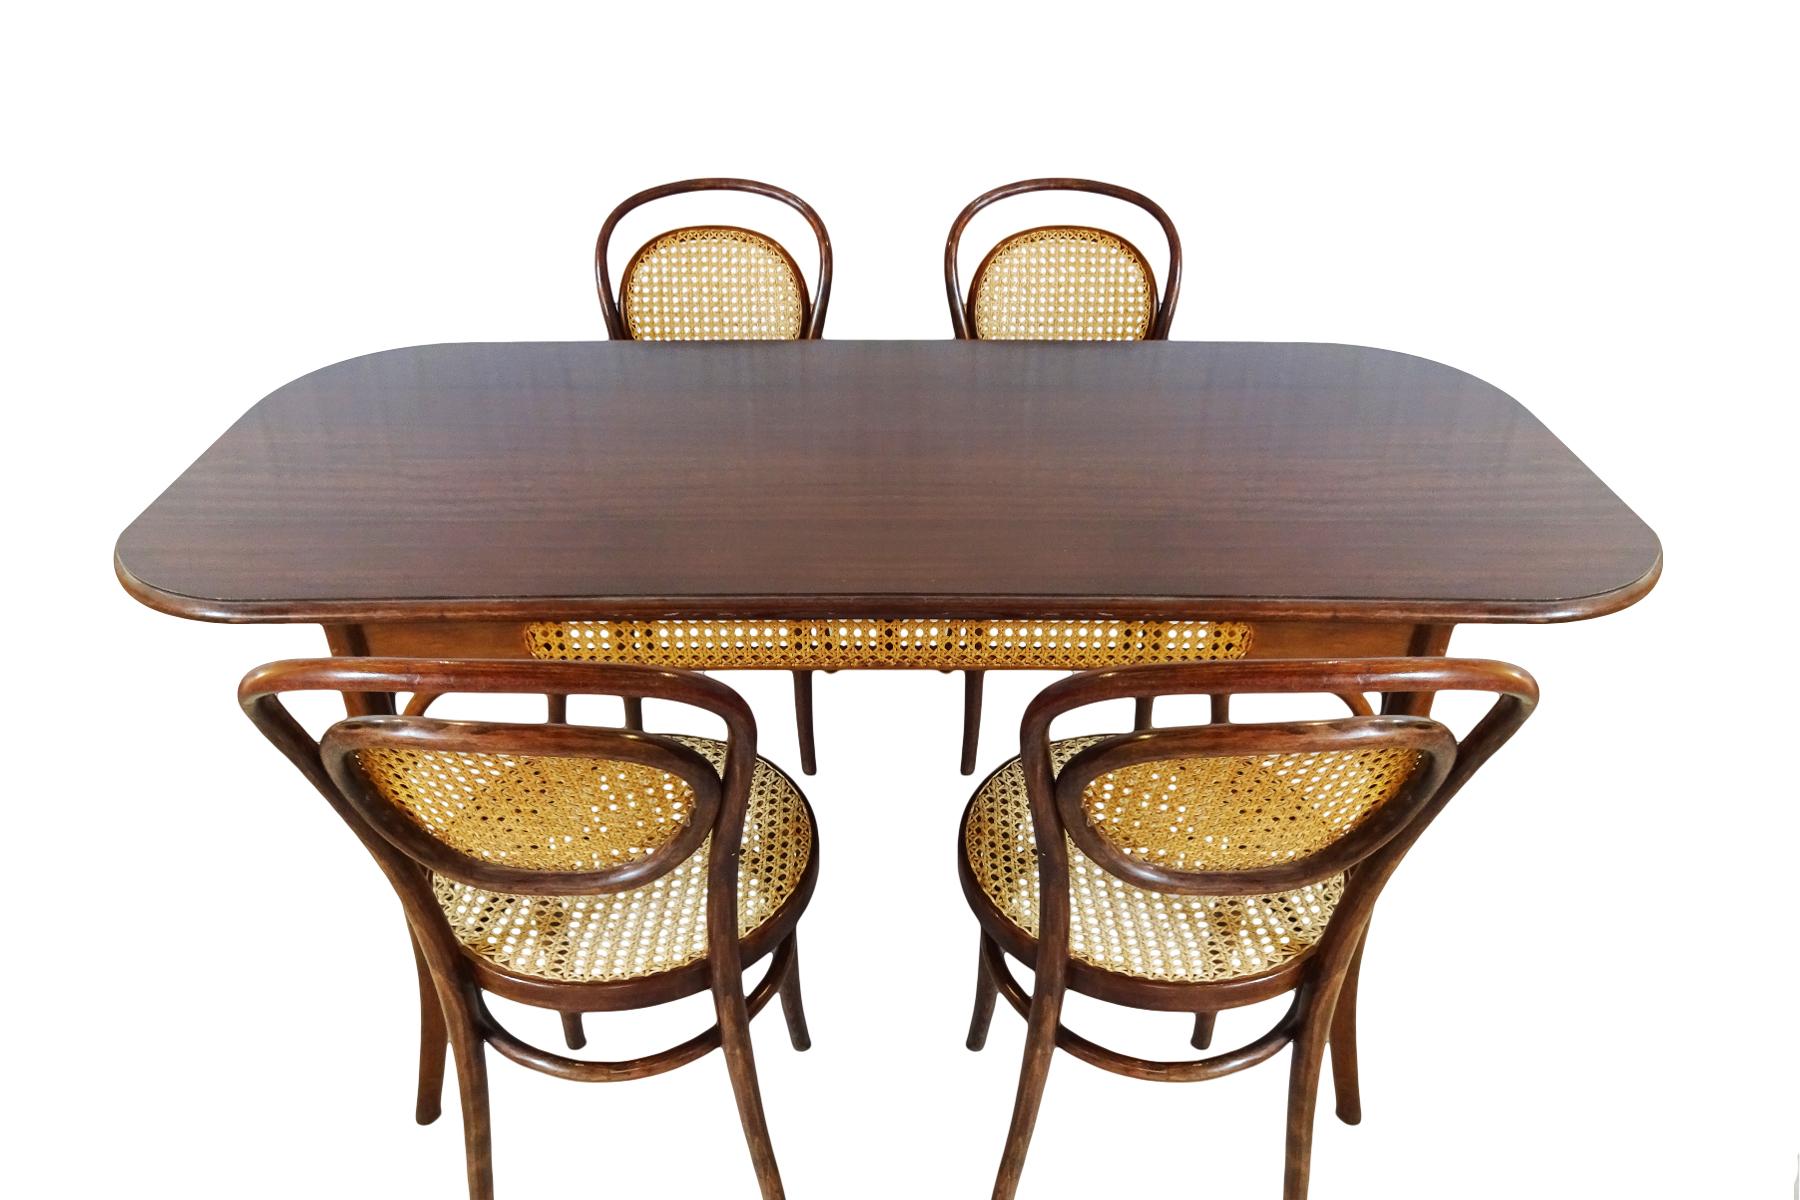 An excellent antique dining set comprising 4 x Michael Thonet designed No. 11 bergère chairs with a matching bergère sided table, circa 1910-1914

It’s very rare to find 4 matching antique Thonet designed chairs with the bergère backs alongside a